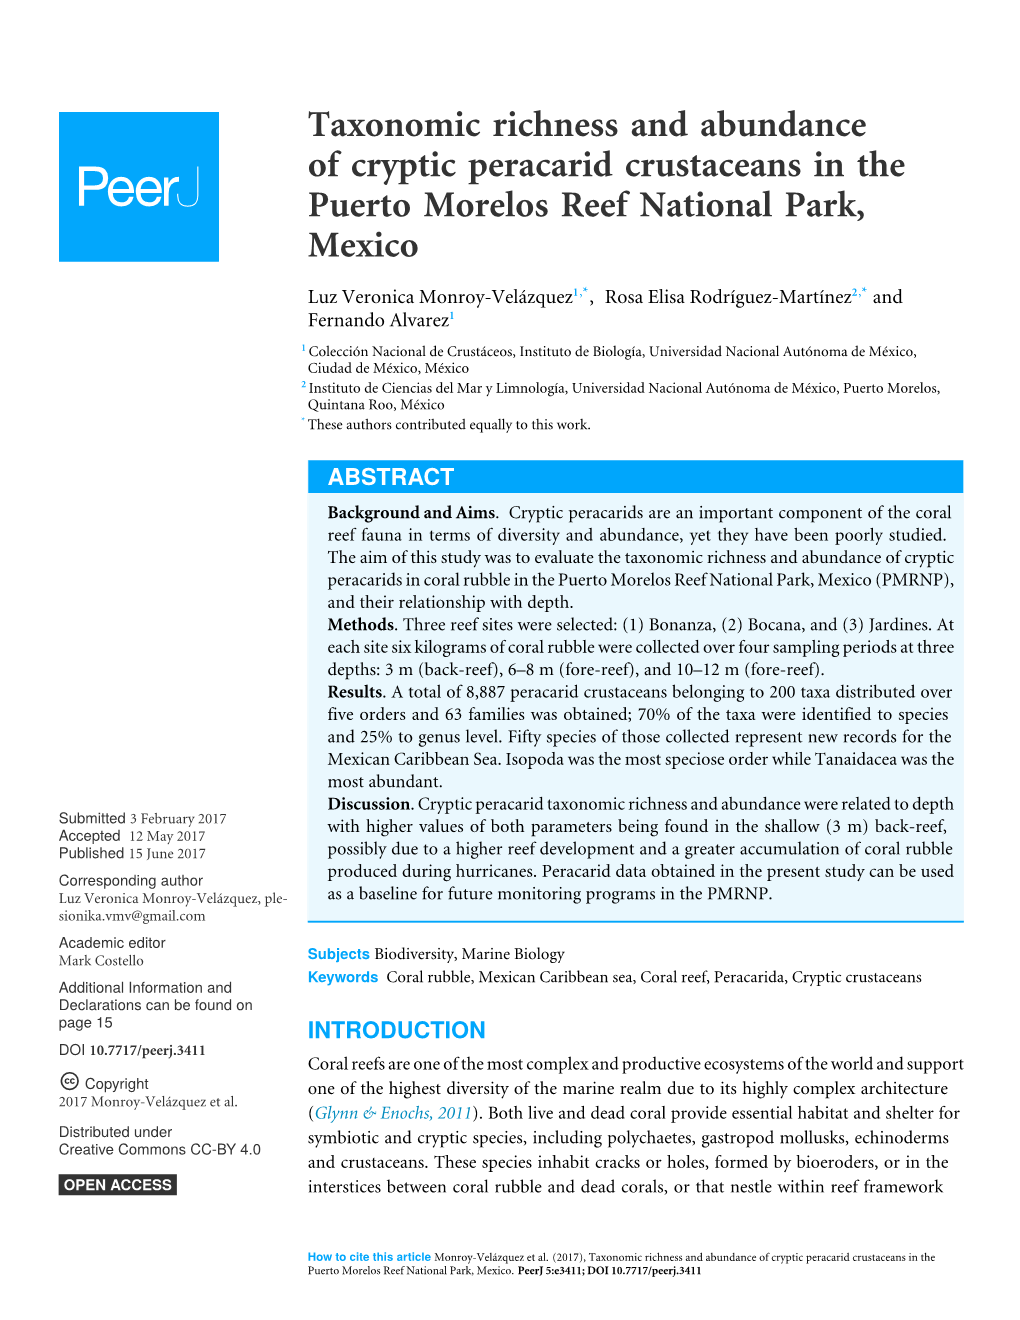 Taxonomic Richness and Abundance of Cryptic Peracarid Crustaceans in the Puerto Morelos Reef National Park, Mexico